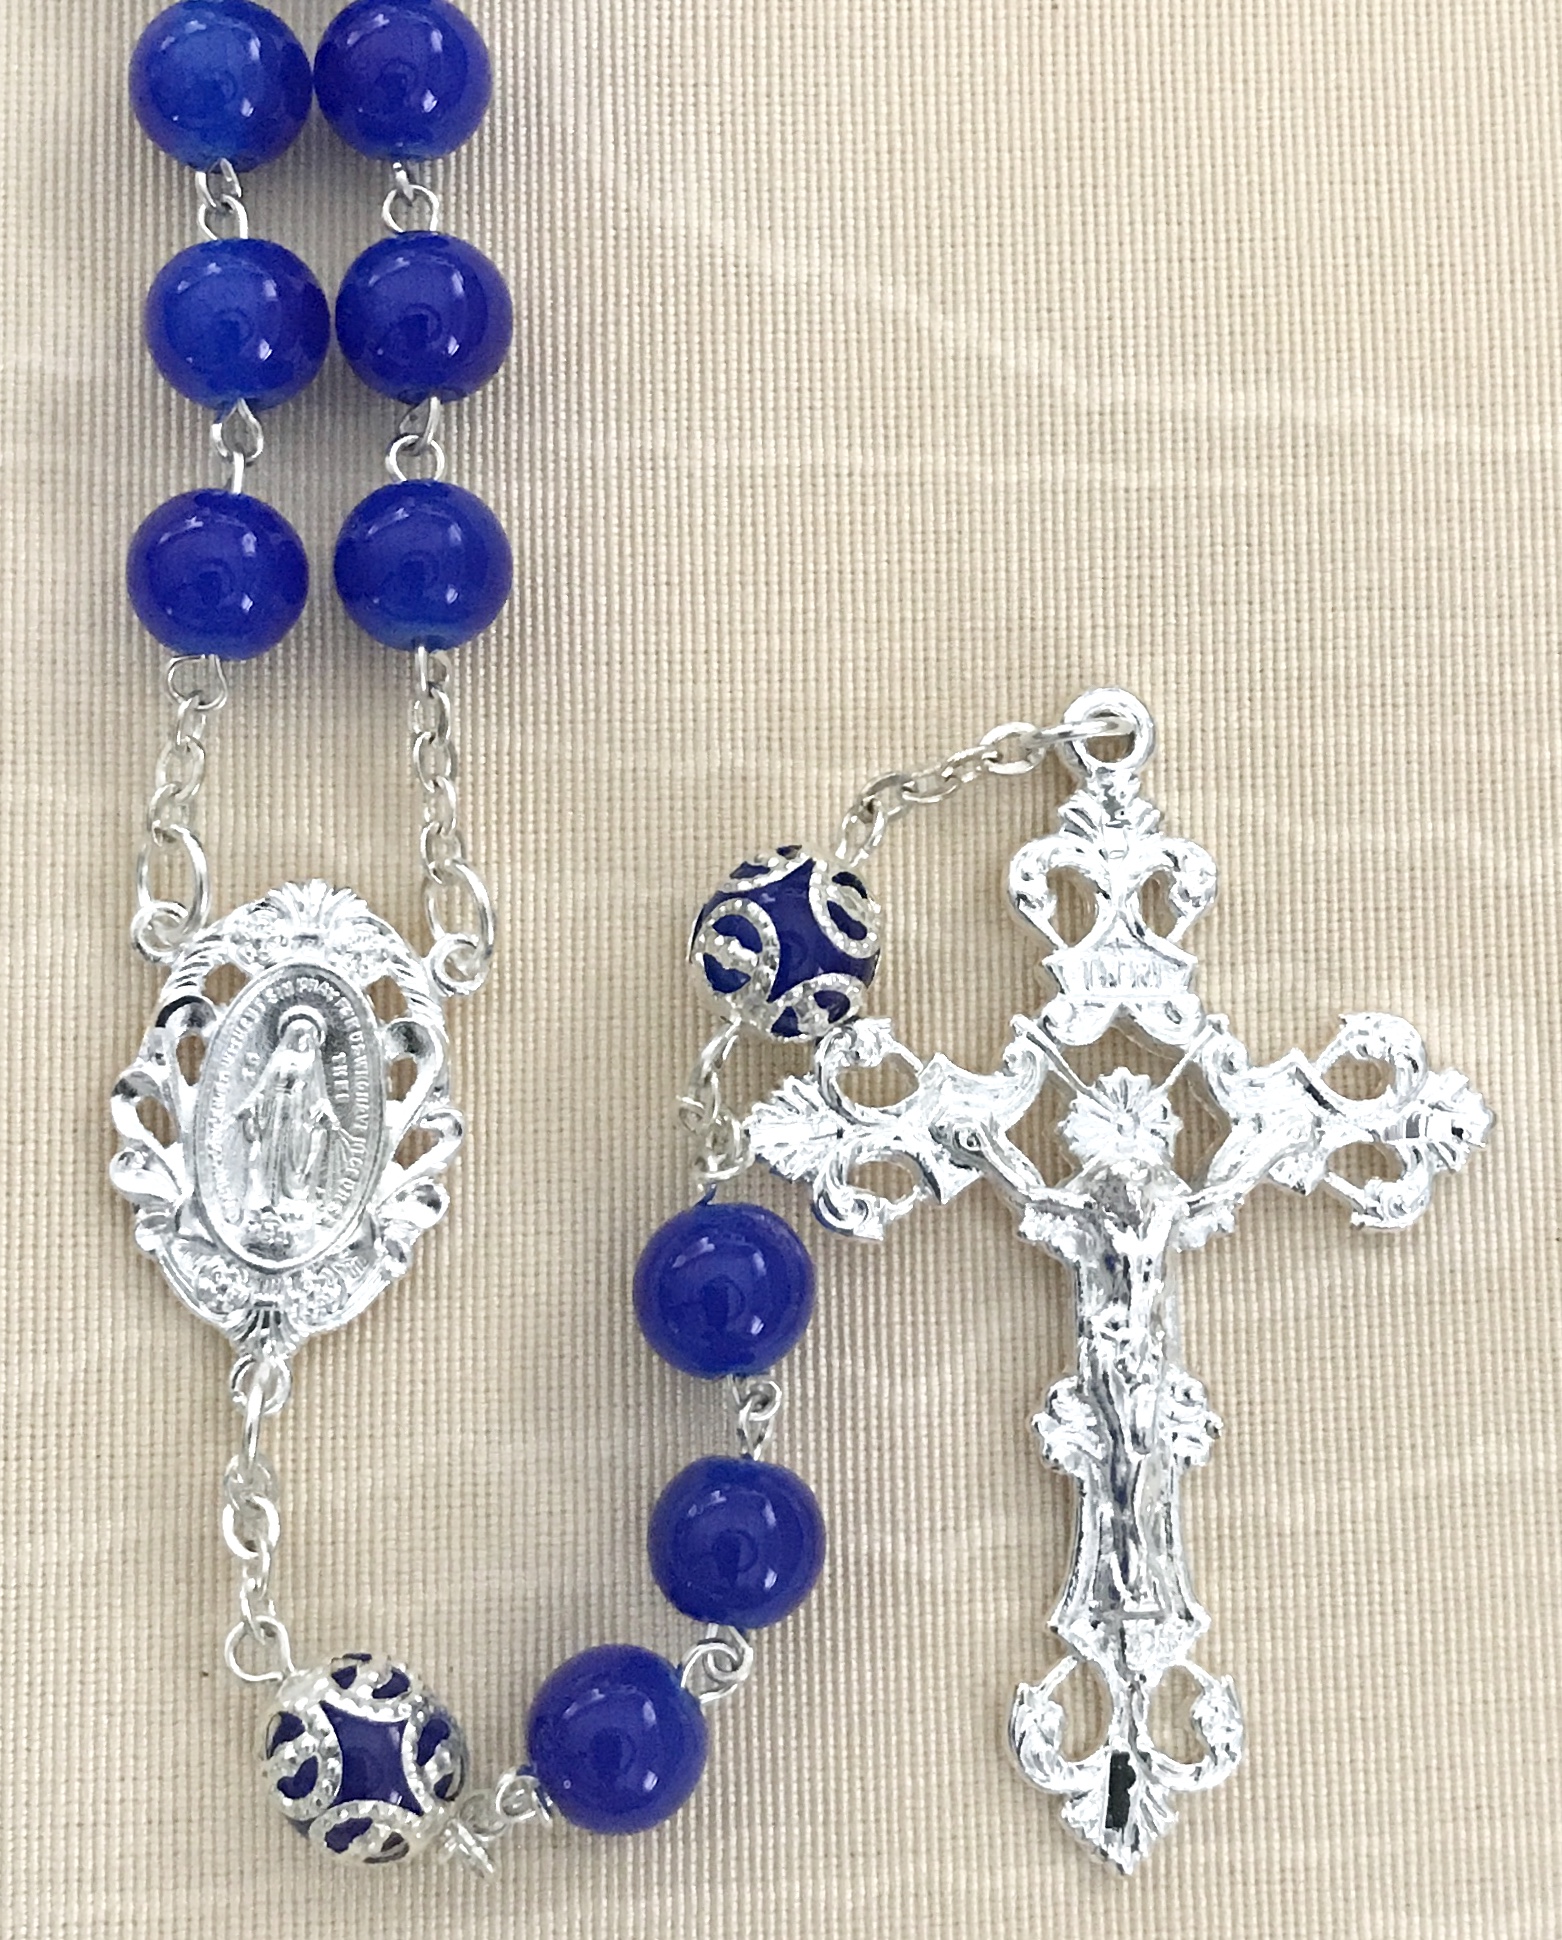 8mm DARK SAPPHIRE GLASS ROSARY WITH CAPPED OUR FATHER BEADS AND STERLING SILVER PLATED CRUCIFIX AND CENTER GIFT BOXED